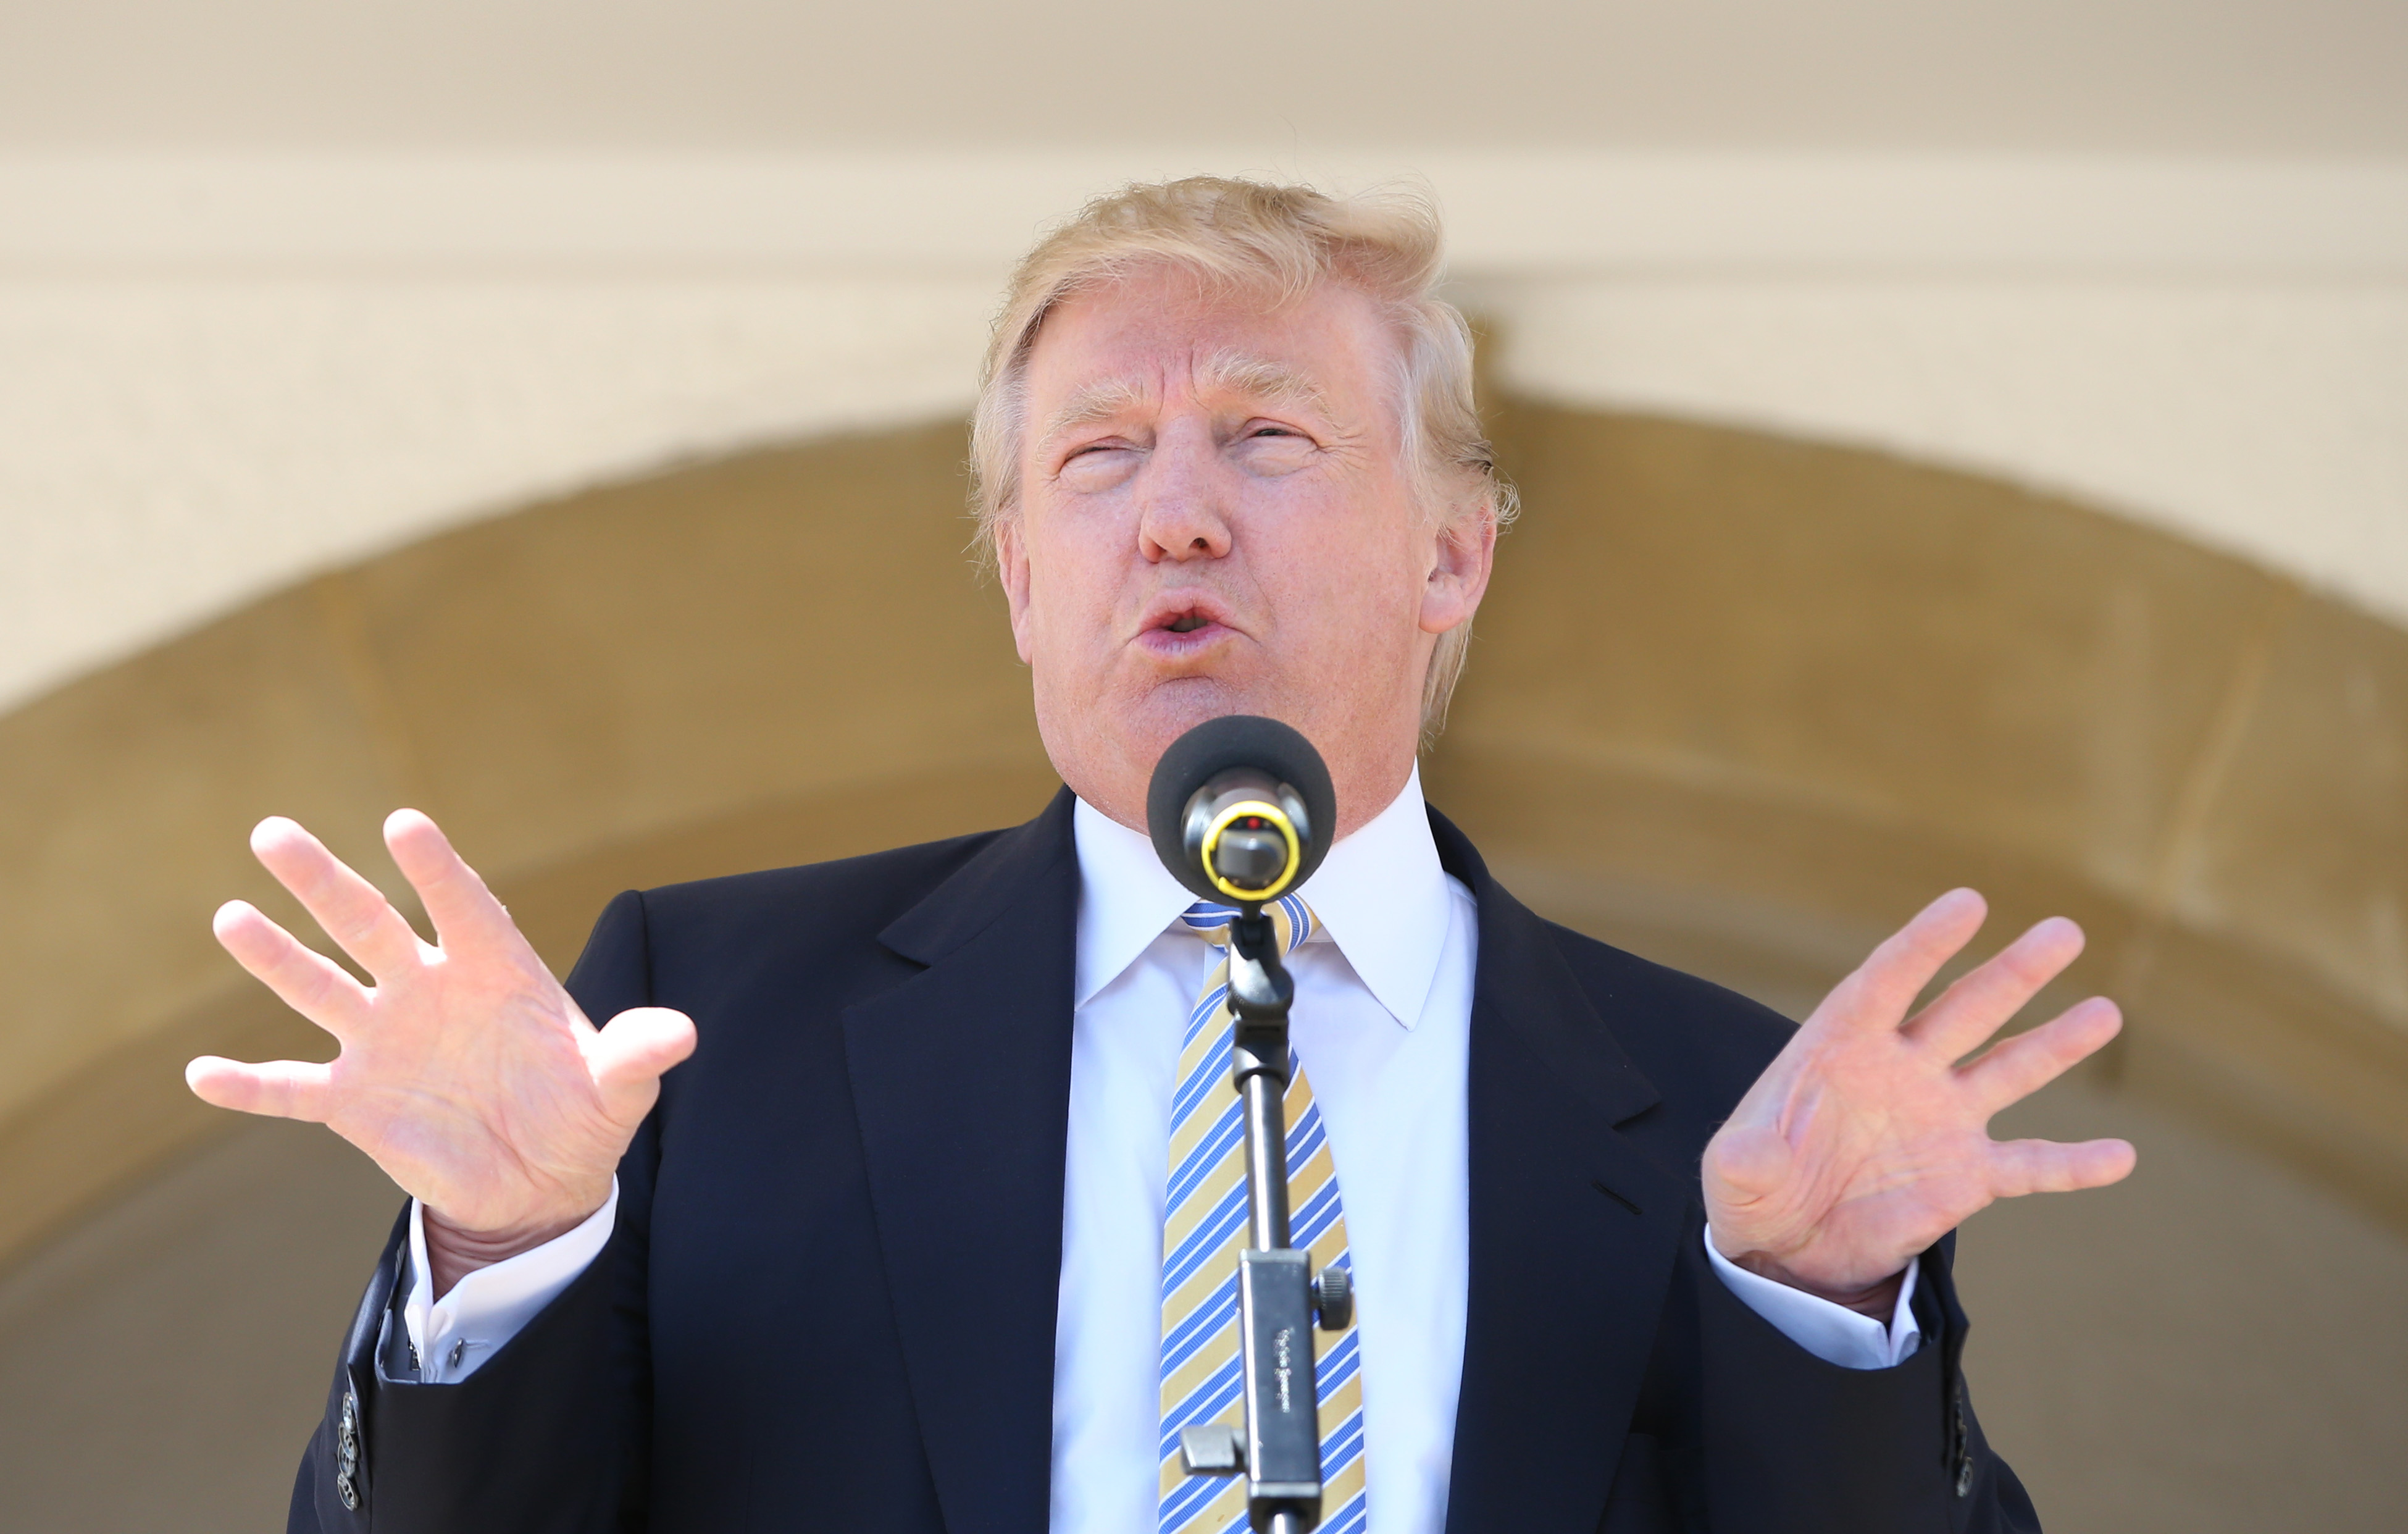 Donald Trump Visits Turnberry Golf Club, after its $10 Million refurbishment, on June 8, 2015 in Turnberry, Scotland. (Ian MacNicol&mdash;Getty Images)